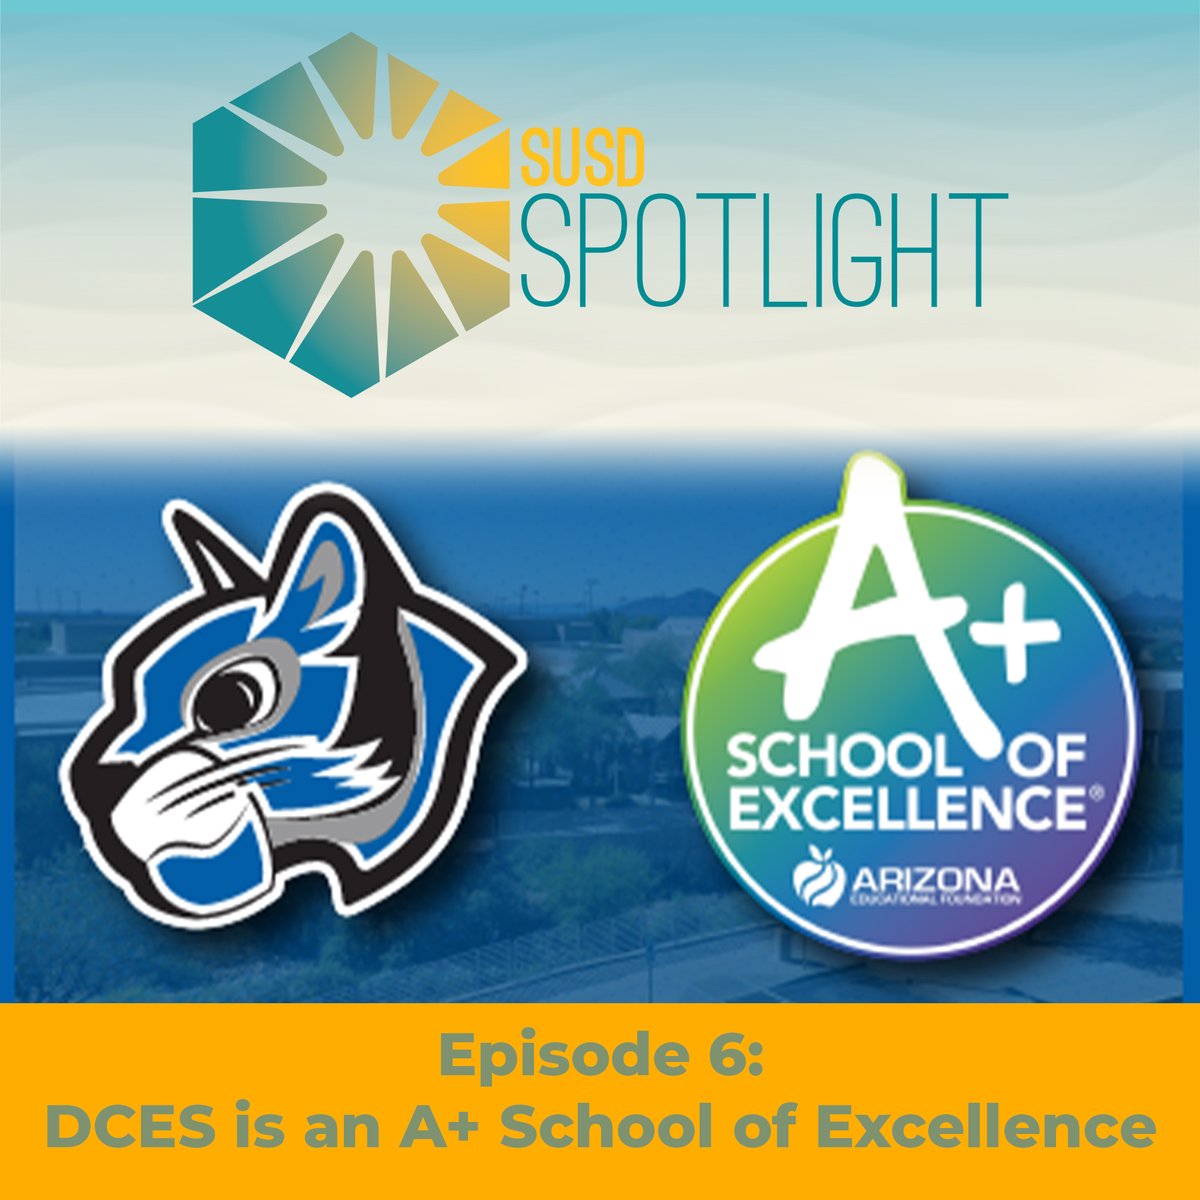 Don't miss our newest podcast episode featuring @DCESSUSD! Learn all about their bilingual education program, where students spend half their day learning in English and the other half in Mandarin. Listen now at susd.org/spotlight or your favorite podcast platform!